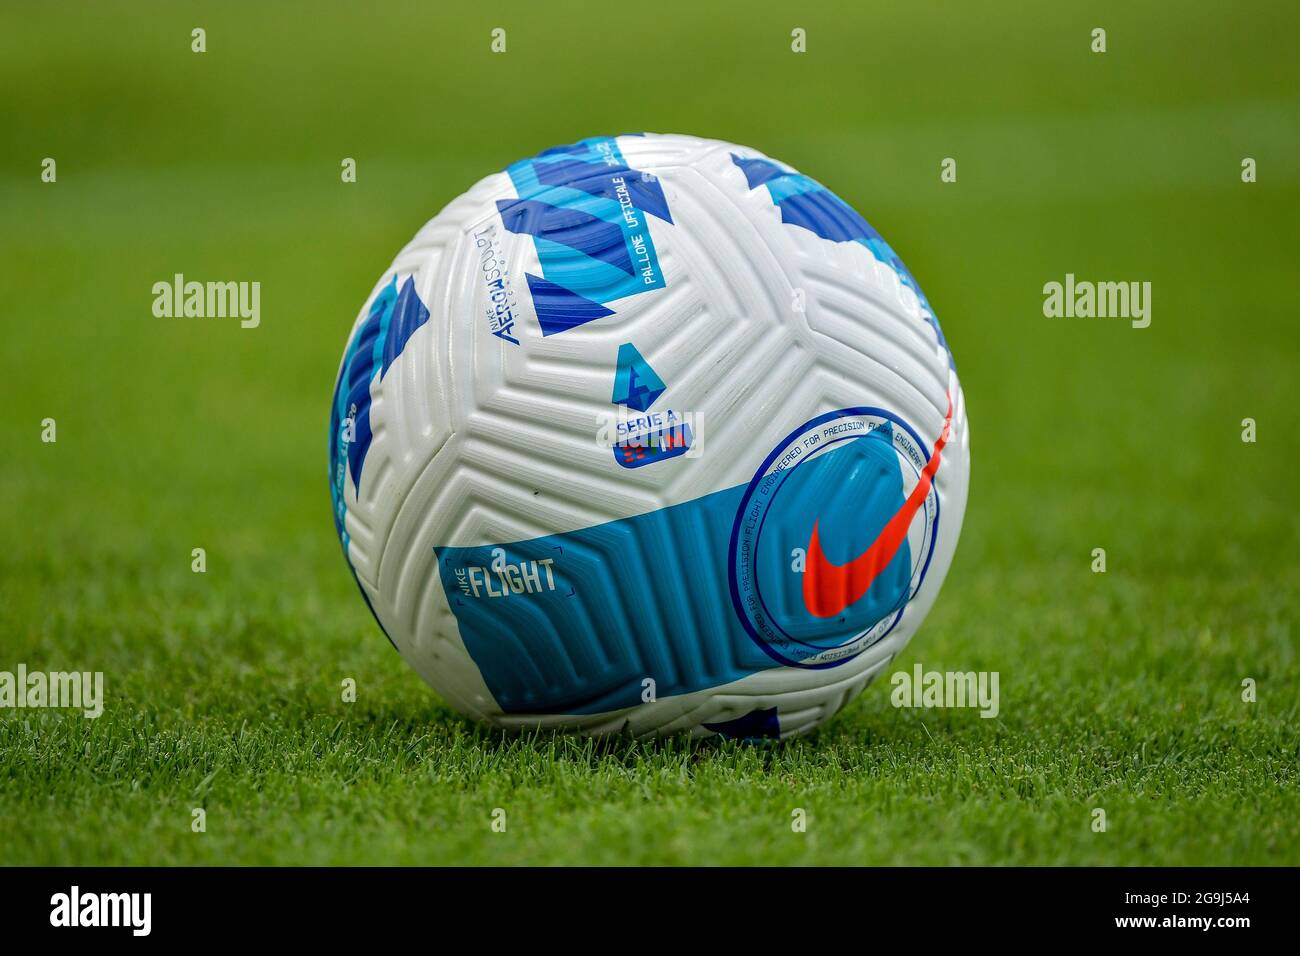 Frosinone, Italy. 25th July, 2021. Serie A Nike official ball, named  flight, is seen on the pitch during the pre season friendly football match  between AS Roma and Debrecen at Benito Stirpe